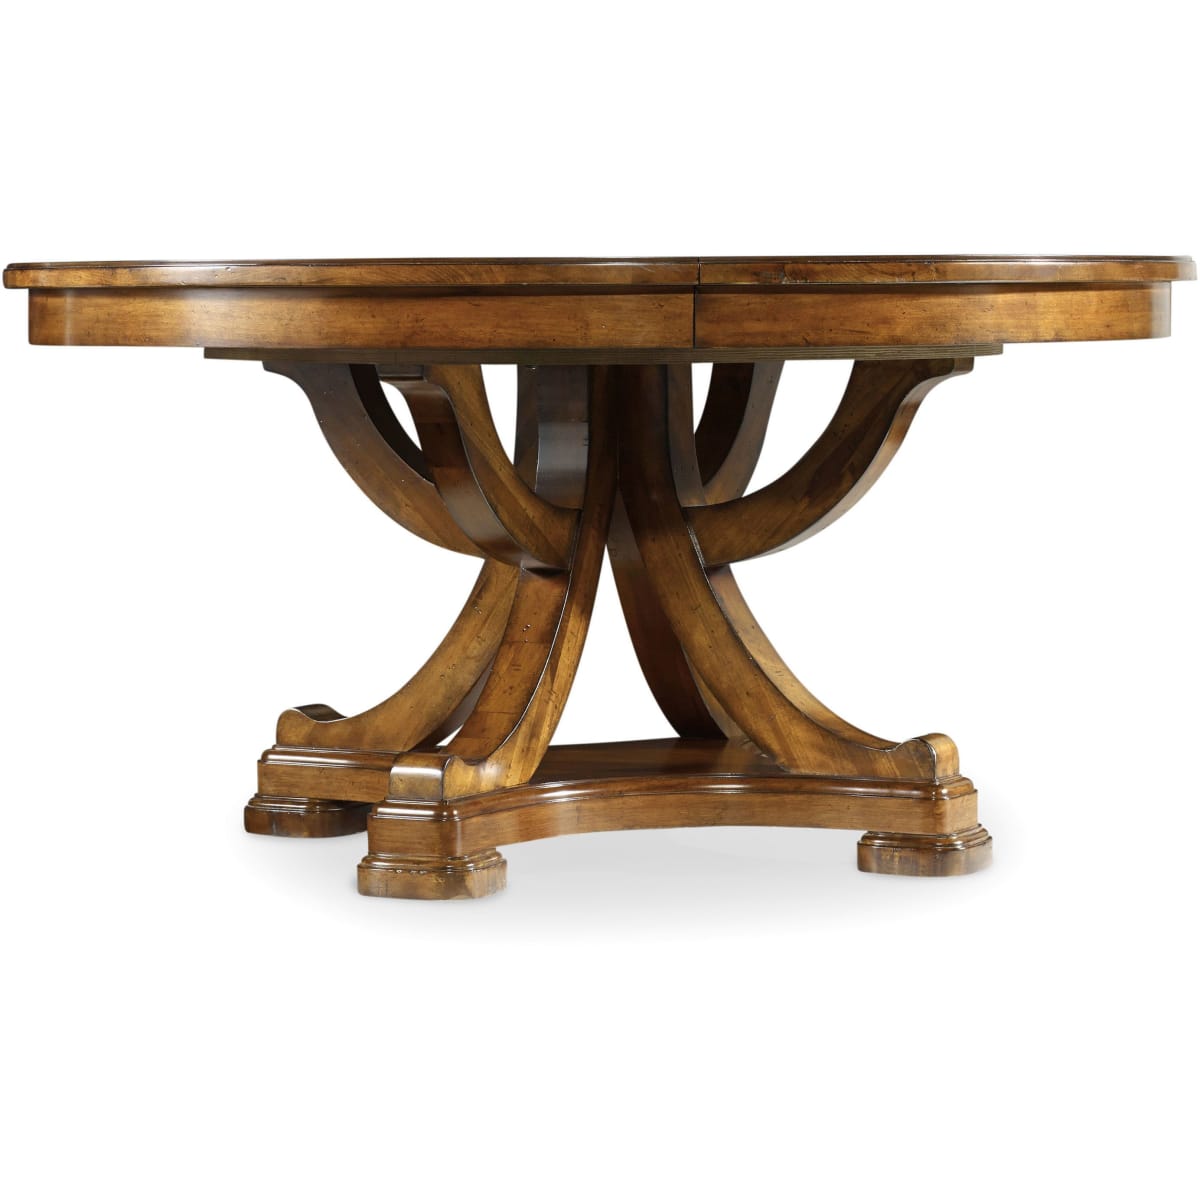 Furniture 5323 75206 Tynecastle, 60 Round Dining Tables With Leaves